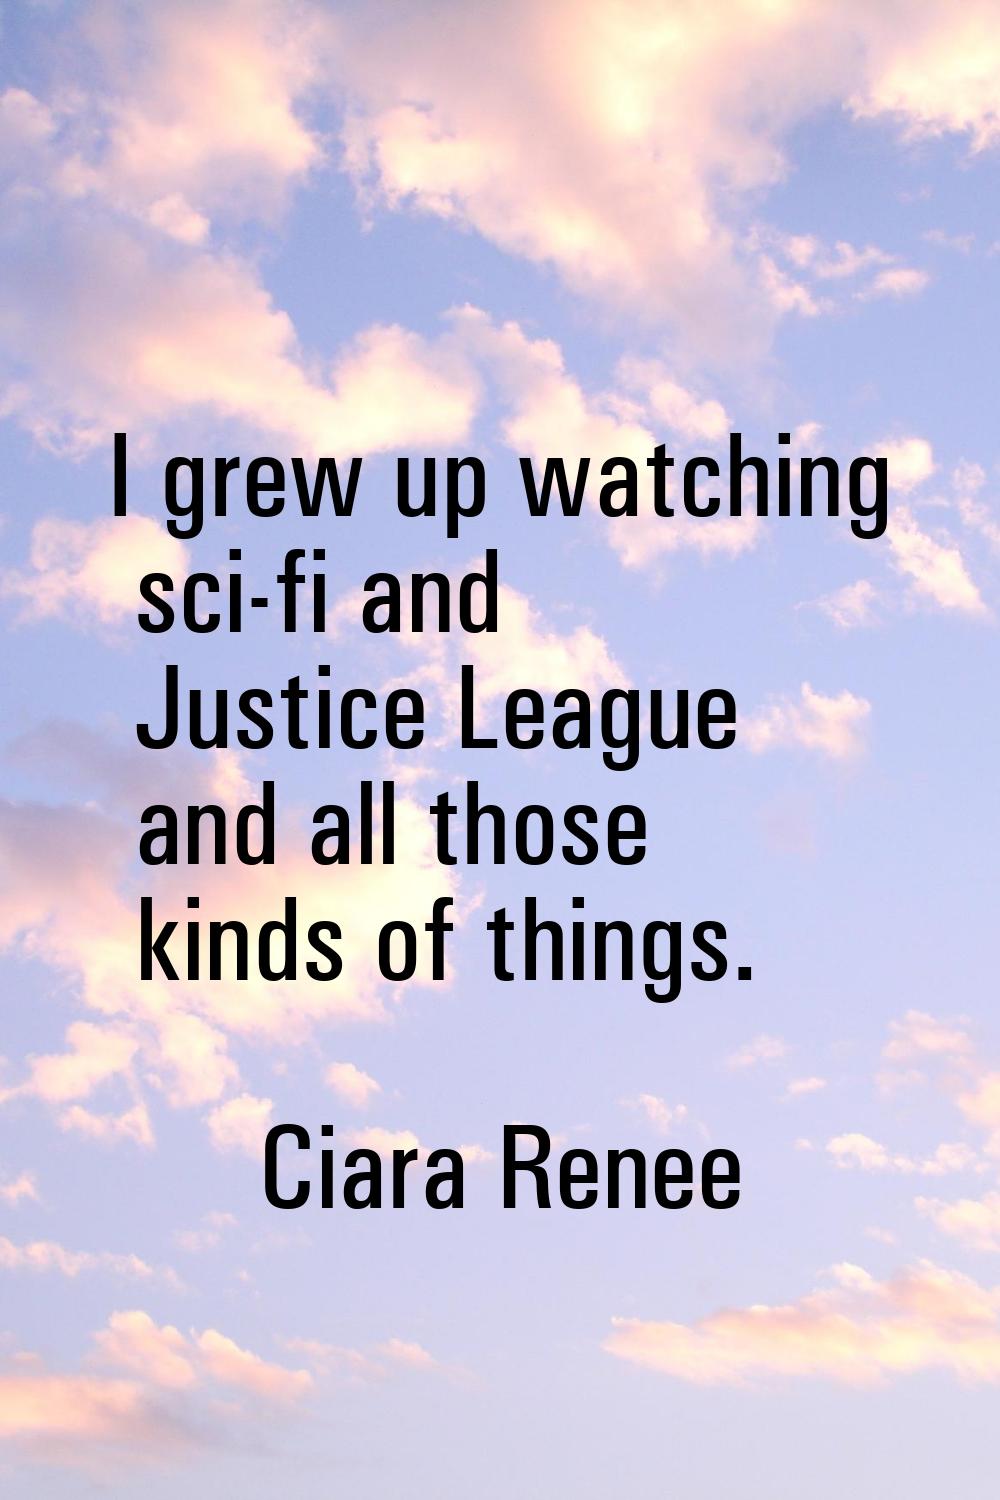 I grew up watching sci-fi and Justice League and all those kinds of things.